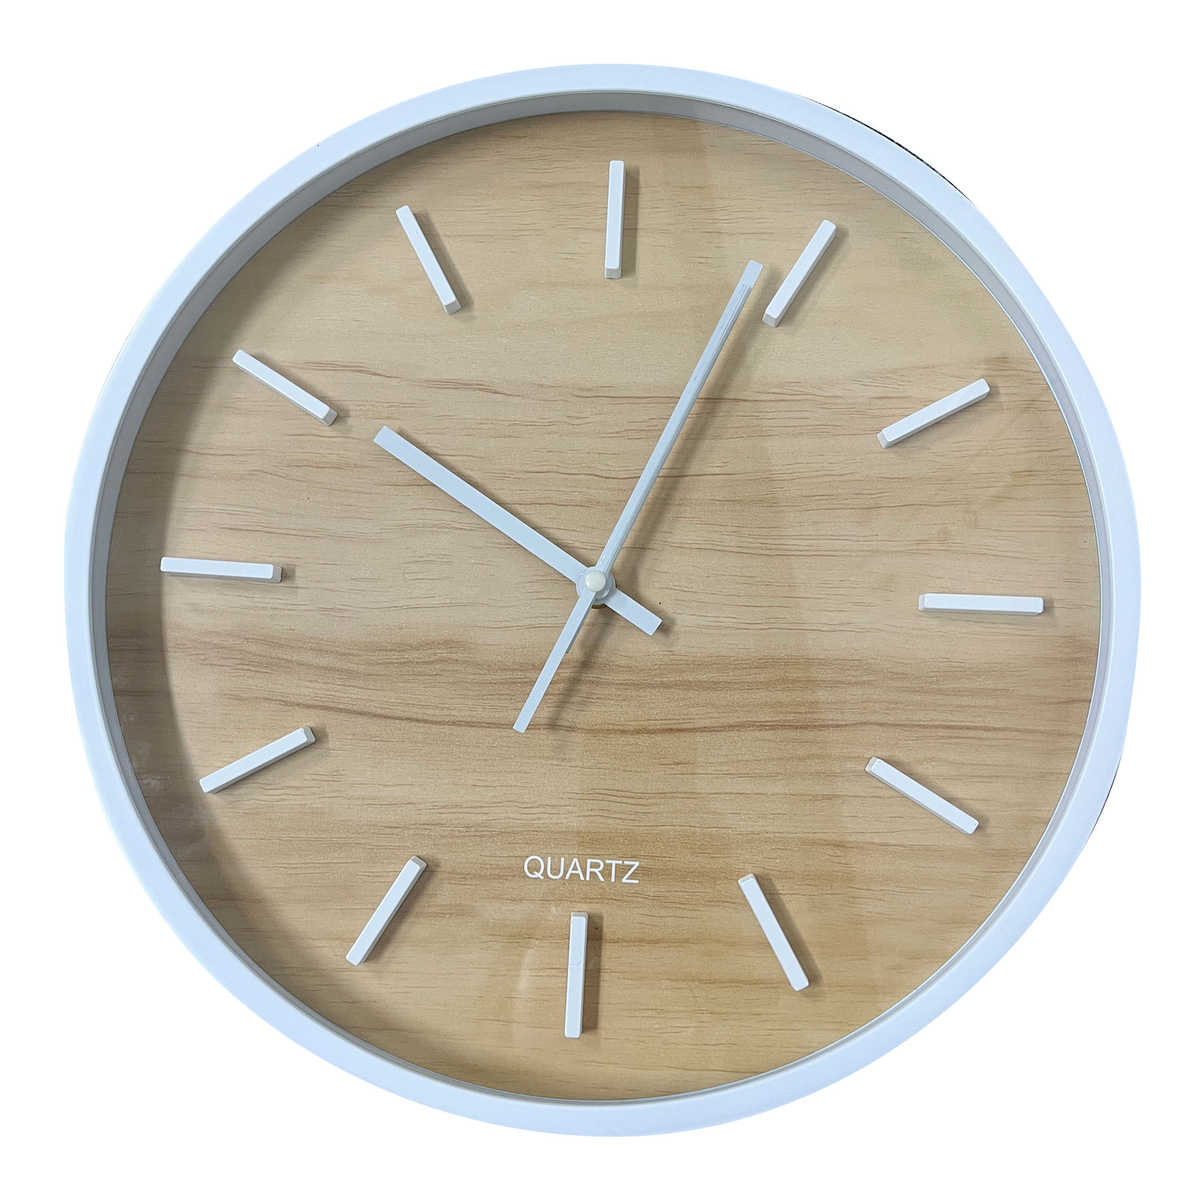 Maple Leaf Home Plastic Wall Clock, Wooden Color Finish, 35 cm, BP-R1402W